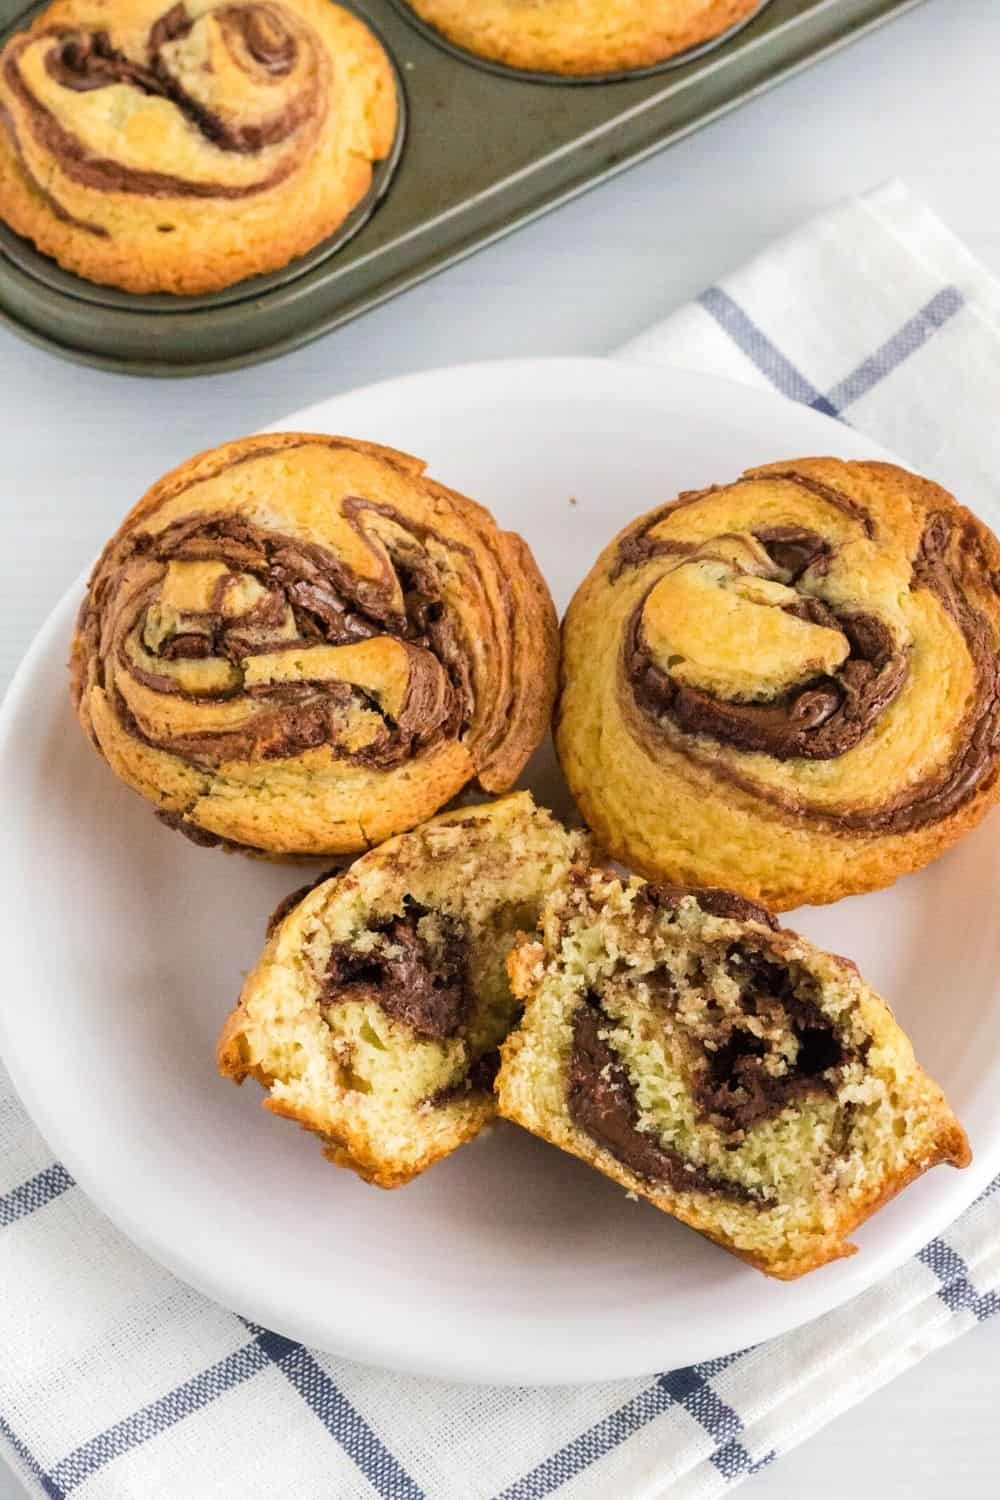 three Nutella stuffed muffins on a plate, with one muffin cut in half to reveal the Nutella swirl inside the muffin